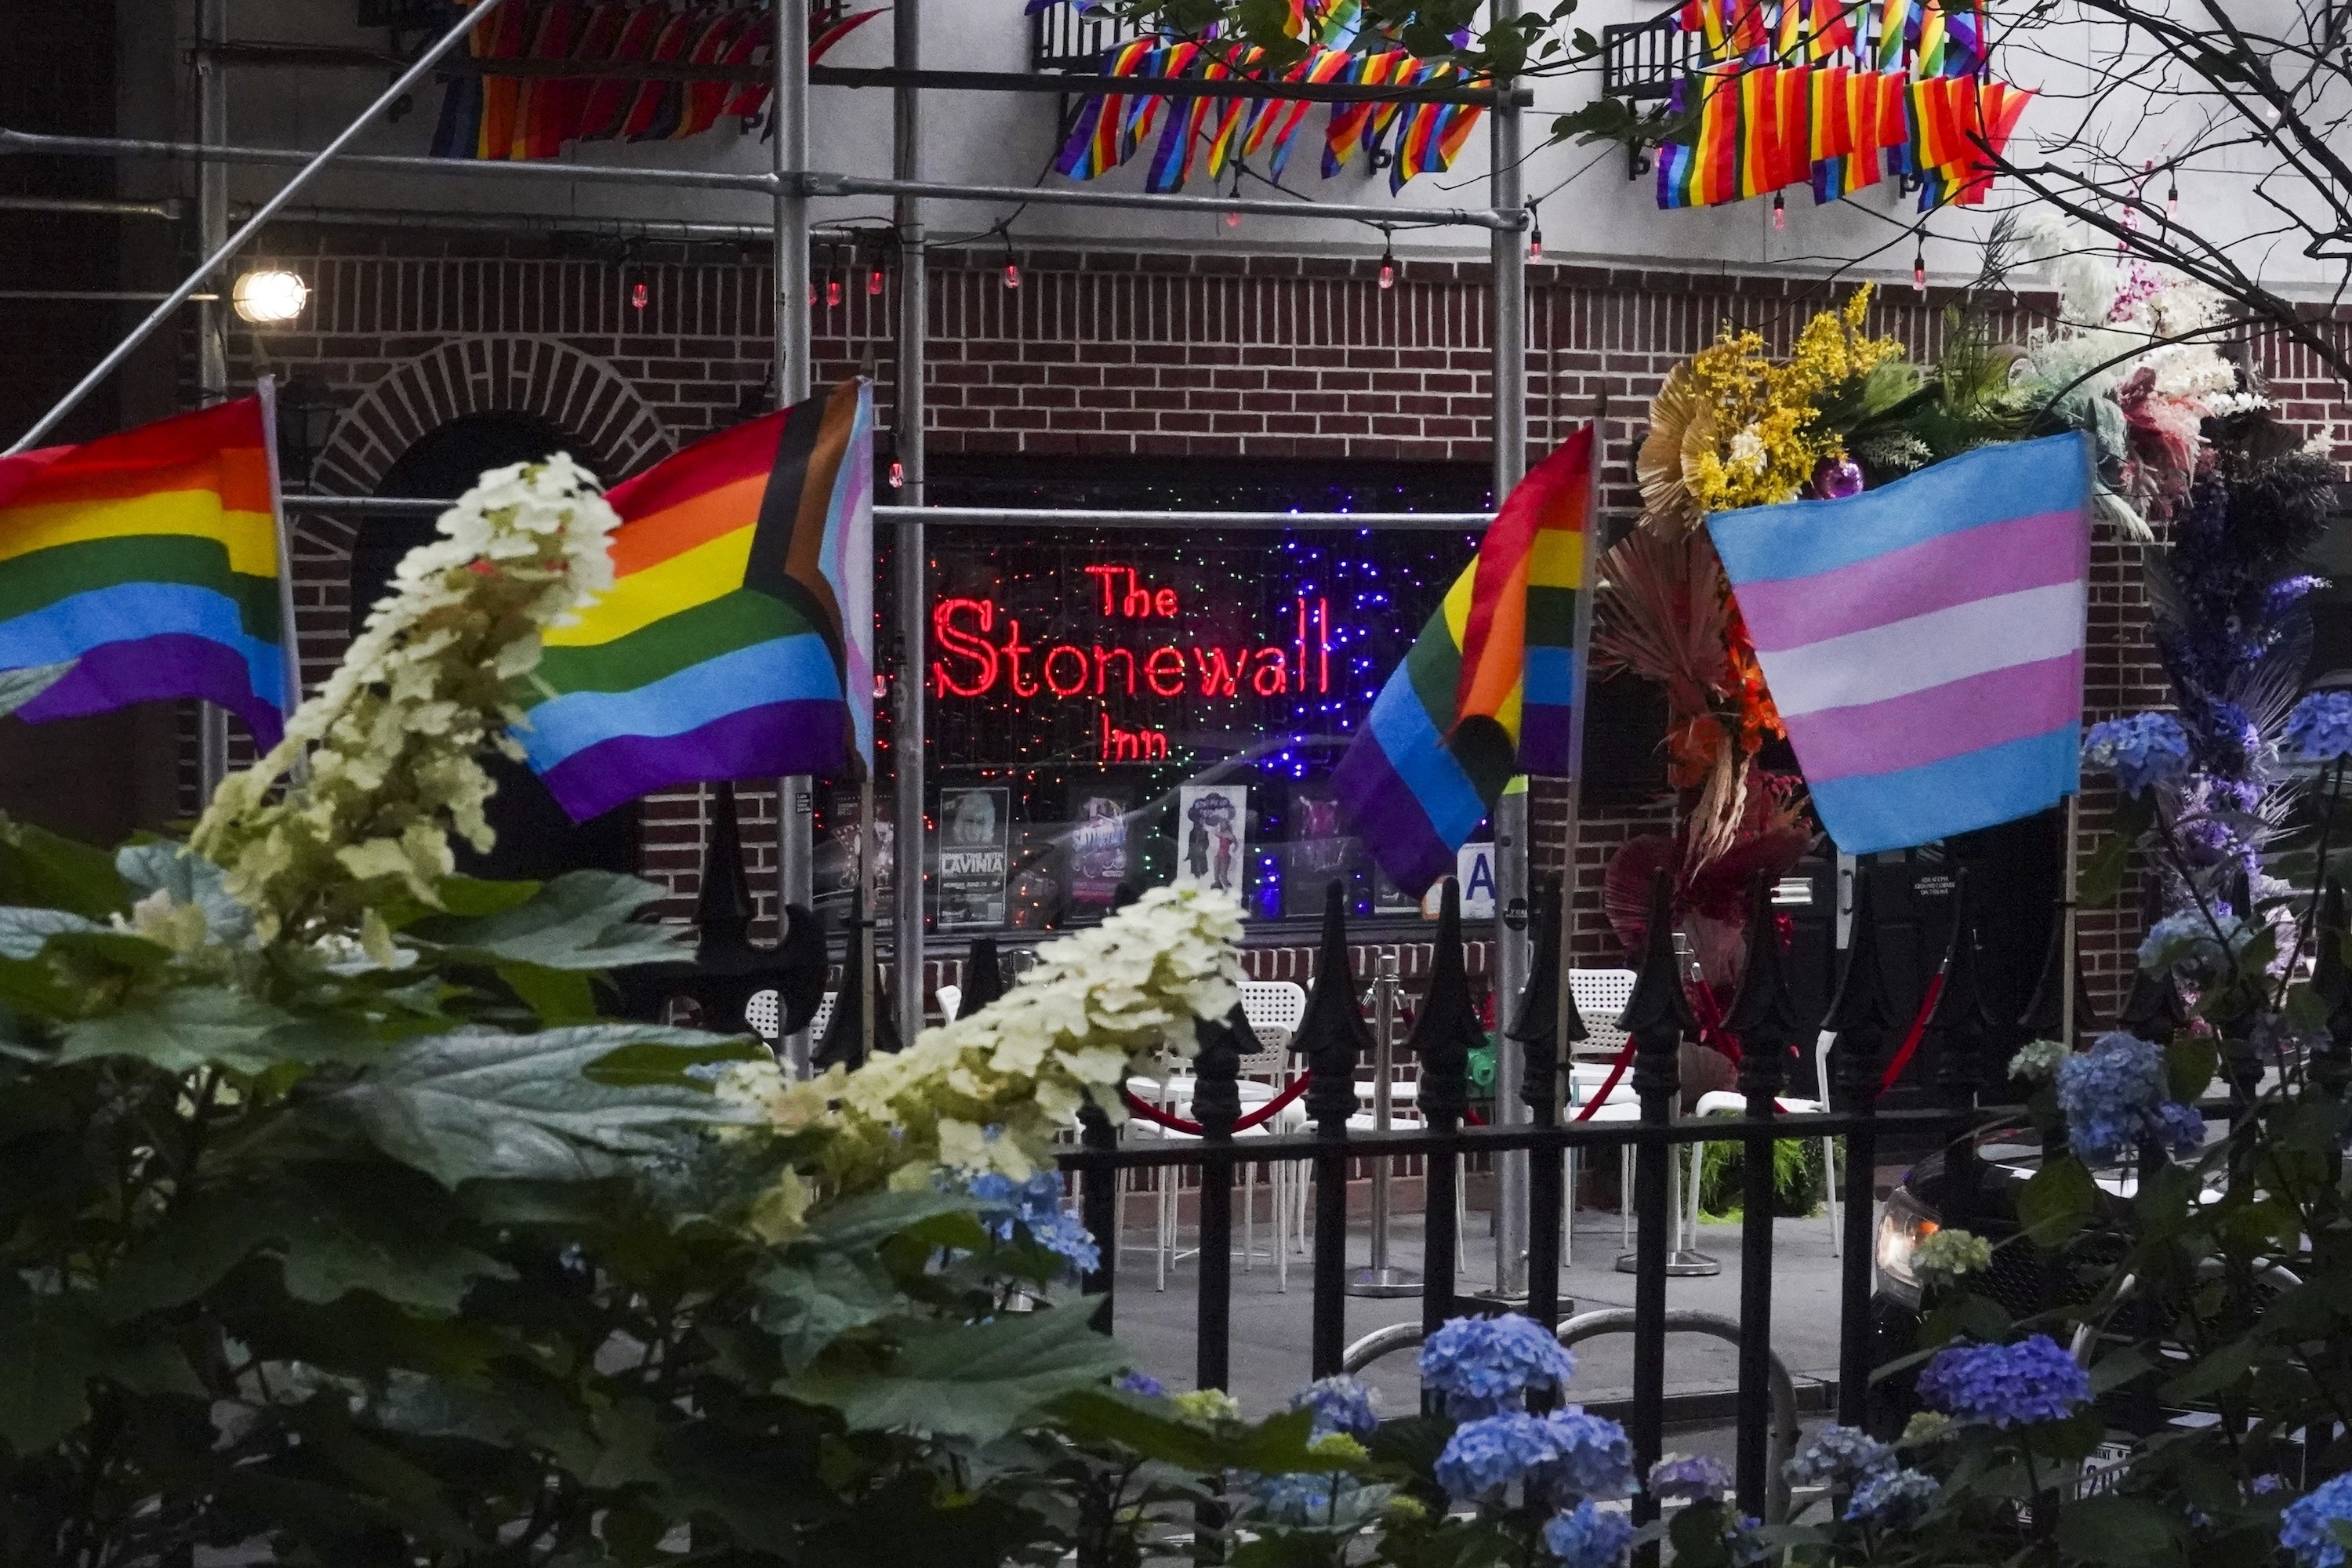 The Stonewall Inn sign appears in the front window with Pride flags in front of it by a gate